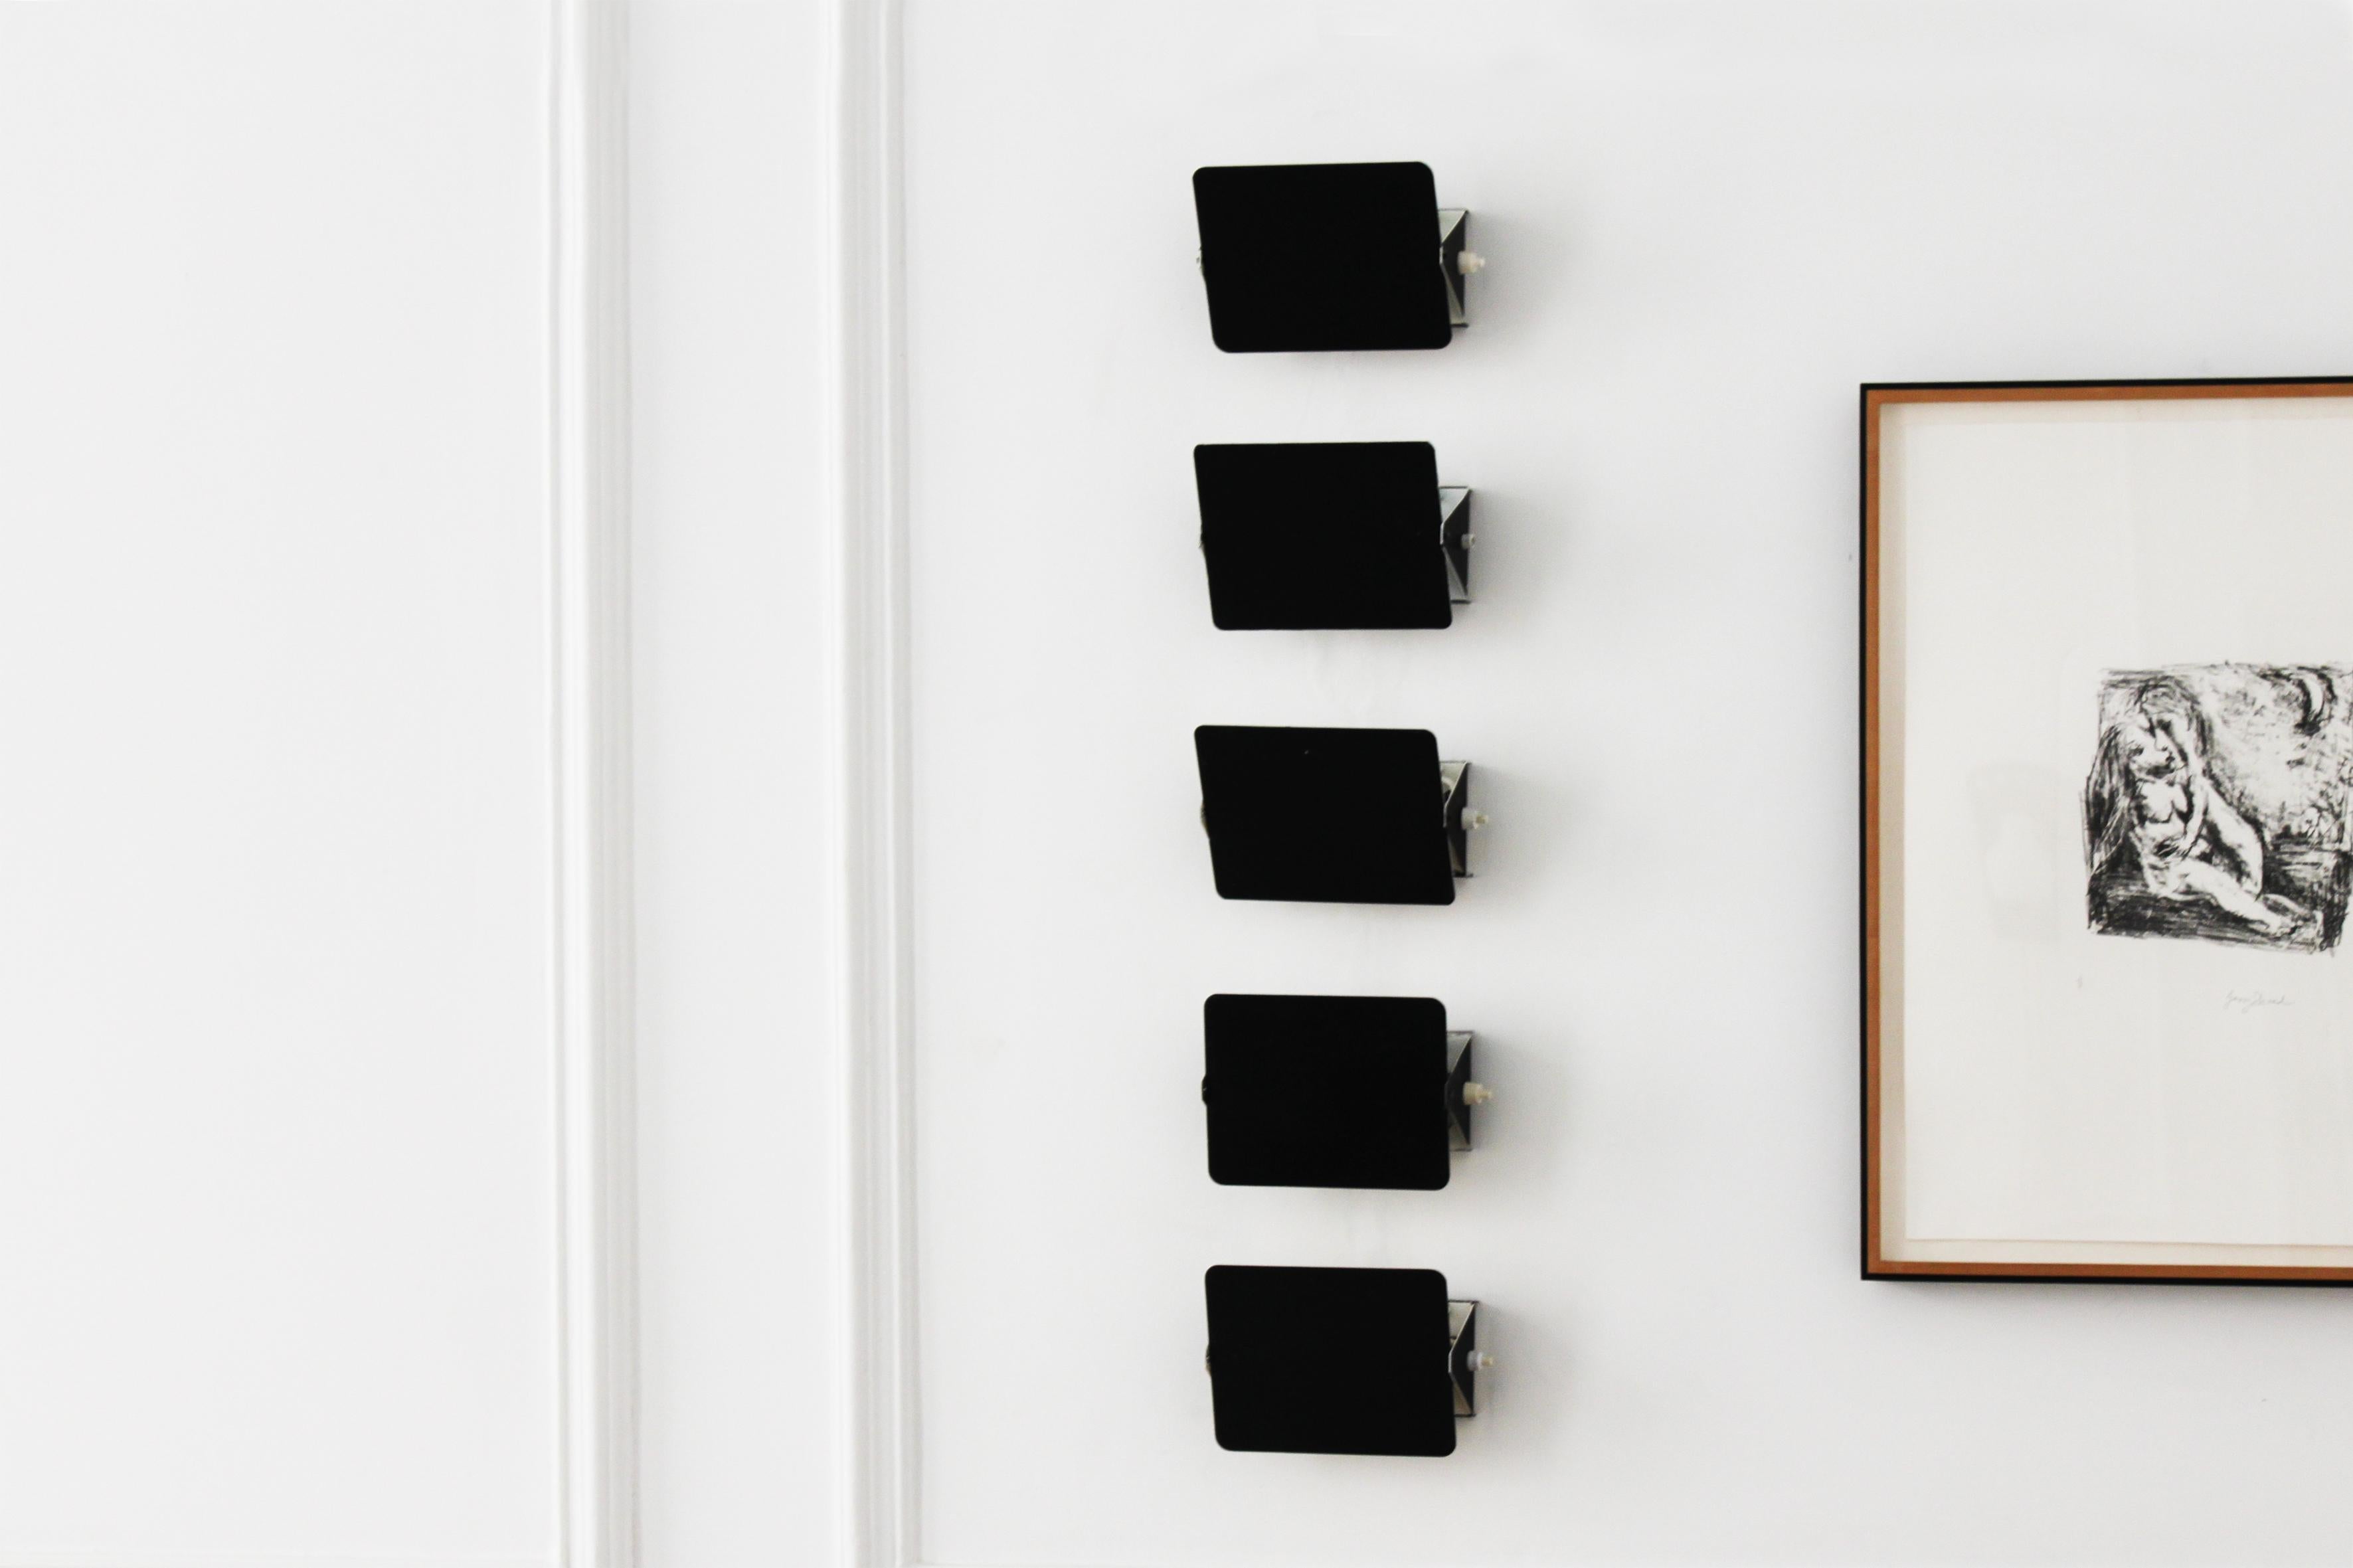 An original set of the iconic rectangular CP1 wall sconces by the legendary 20th century designer Charlotte Perriand. The black lacquered swiveling front plate conceals the light bulb and allows the light to be angled and directed. Can be installed